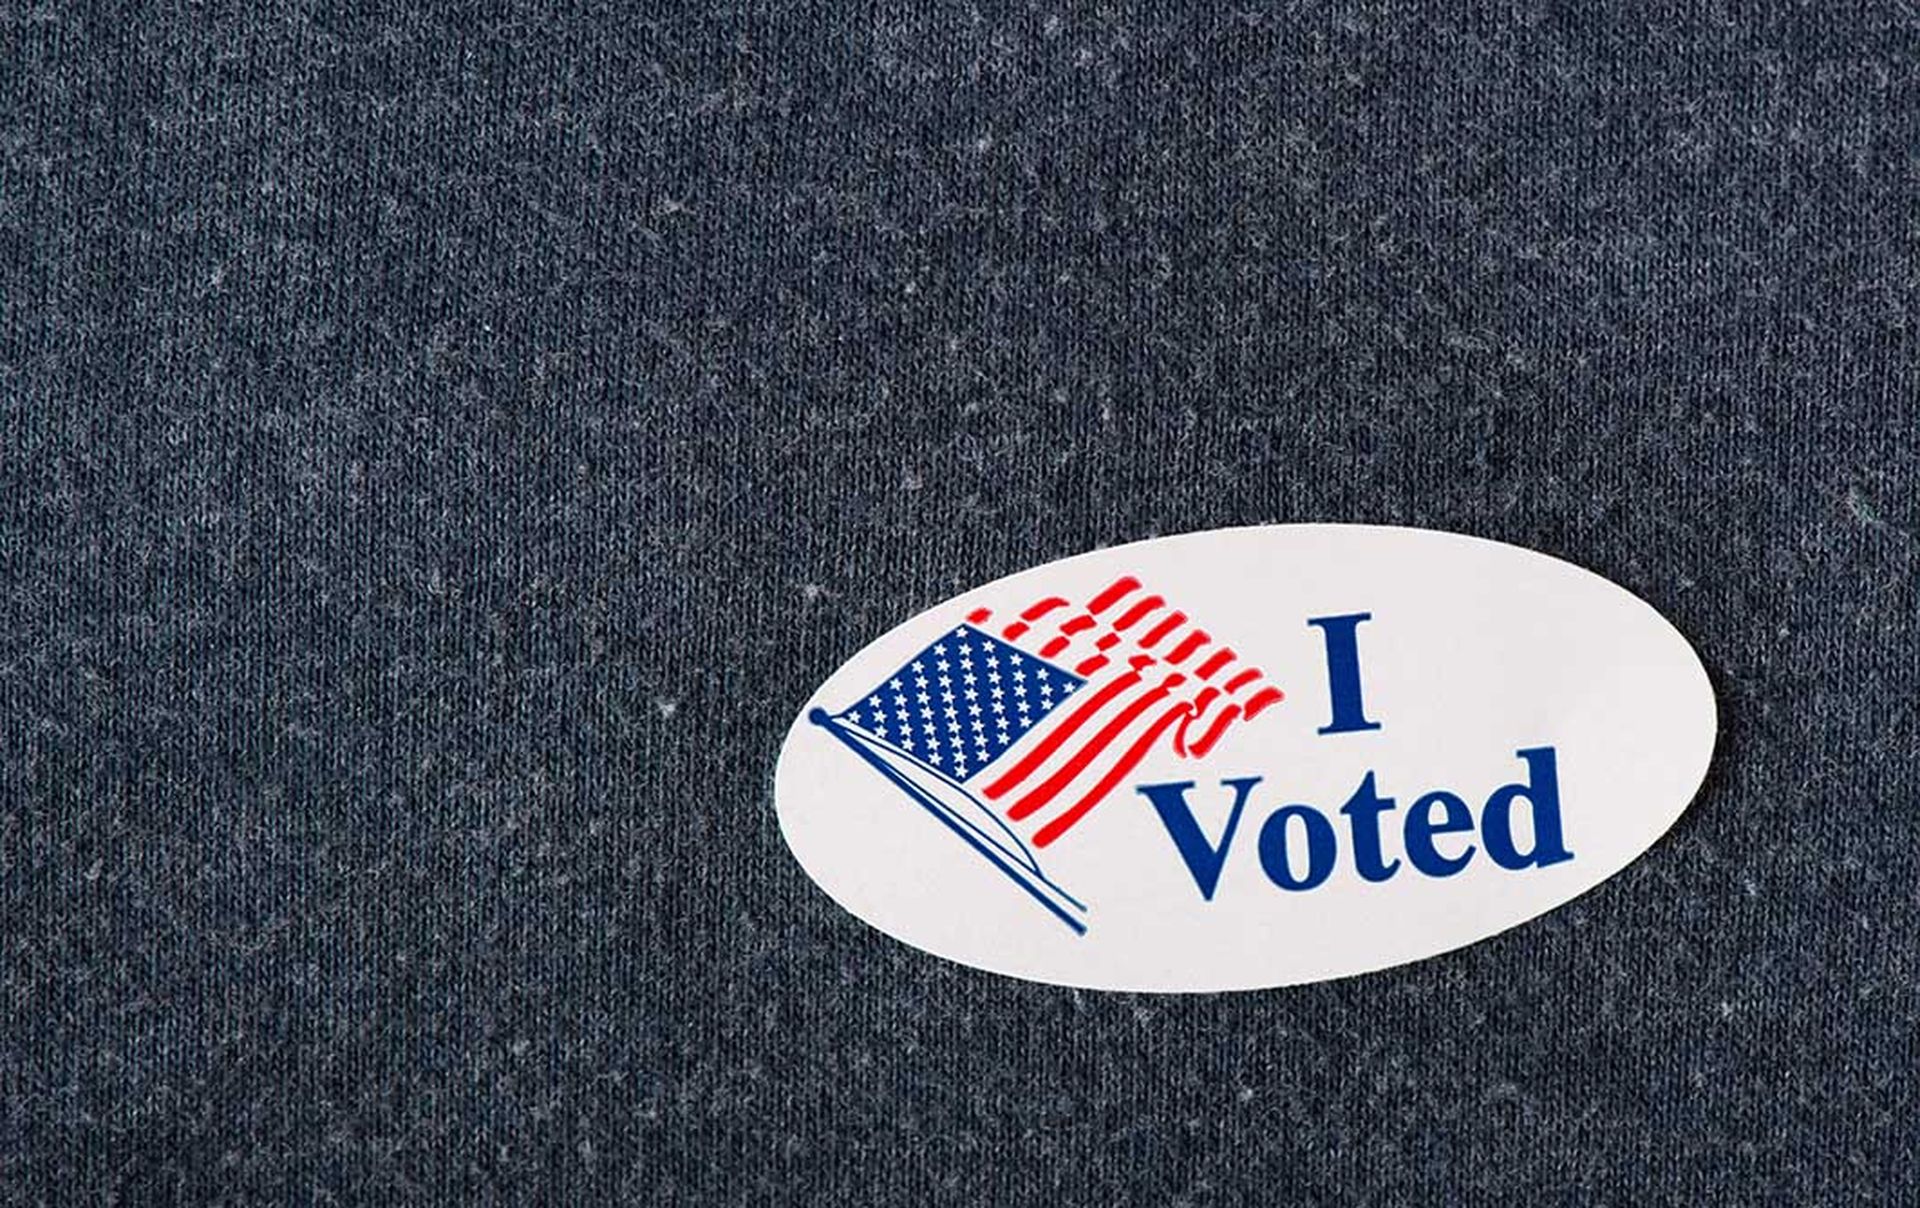 Closeup of an American "I voted" sticker placed on a navy shirt.